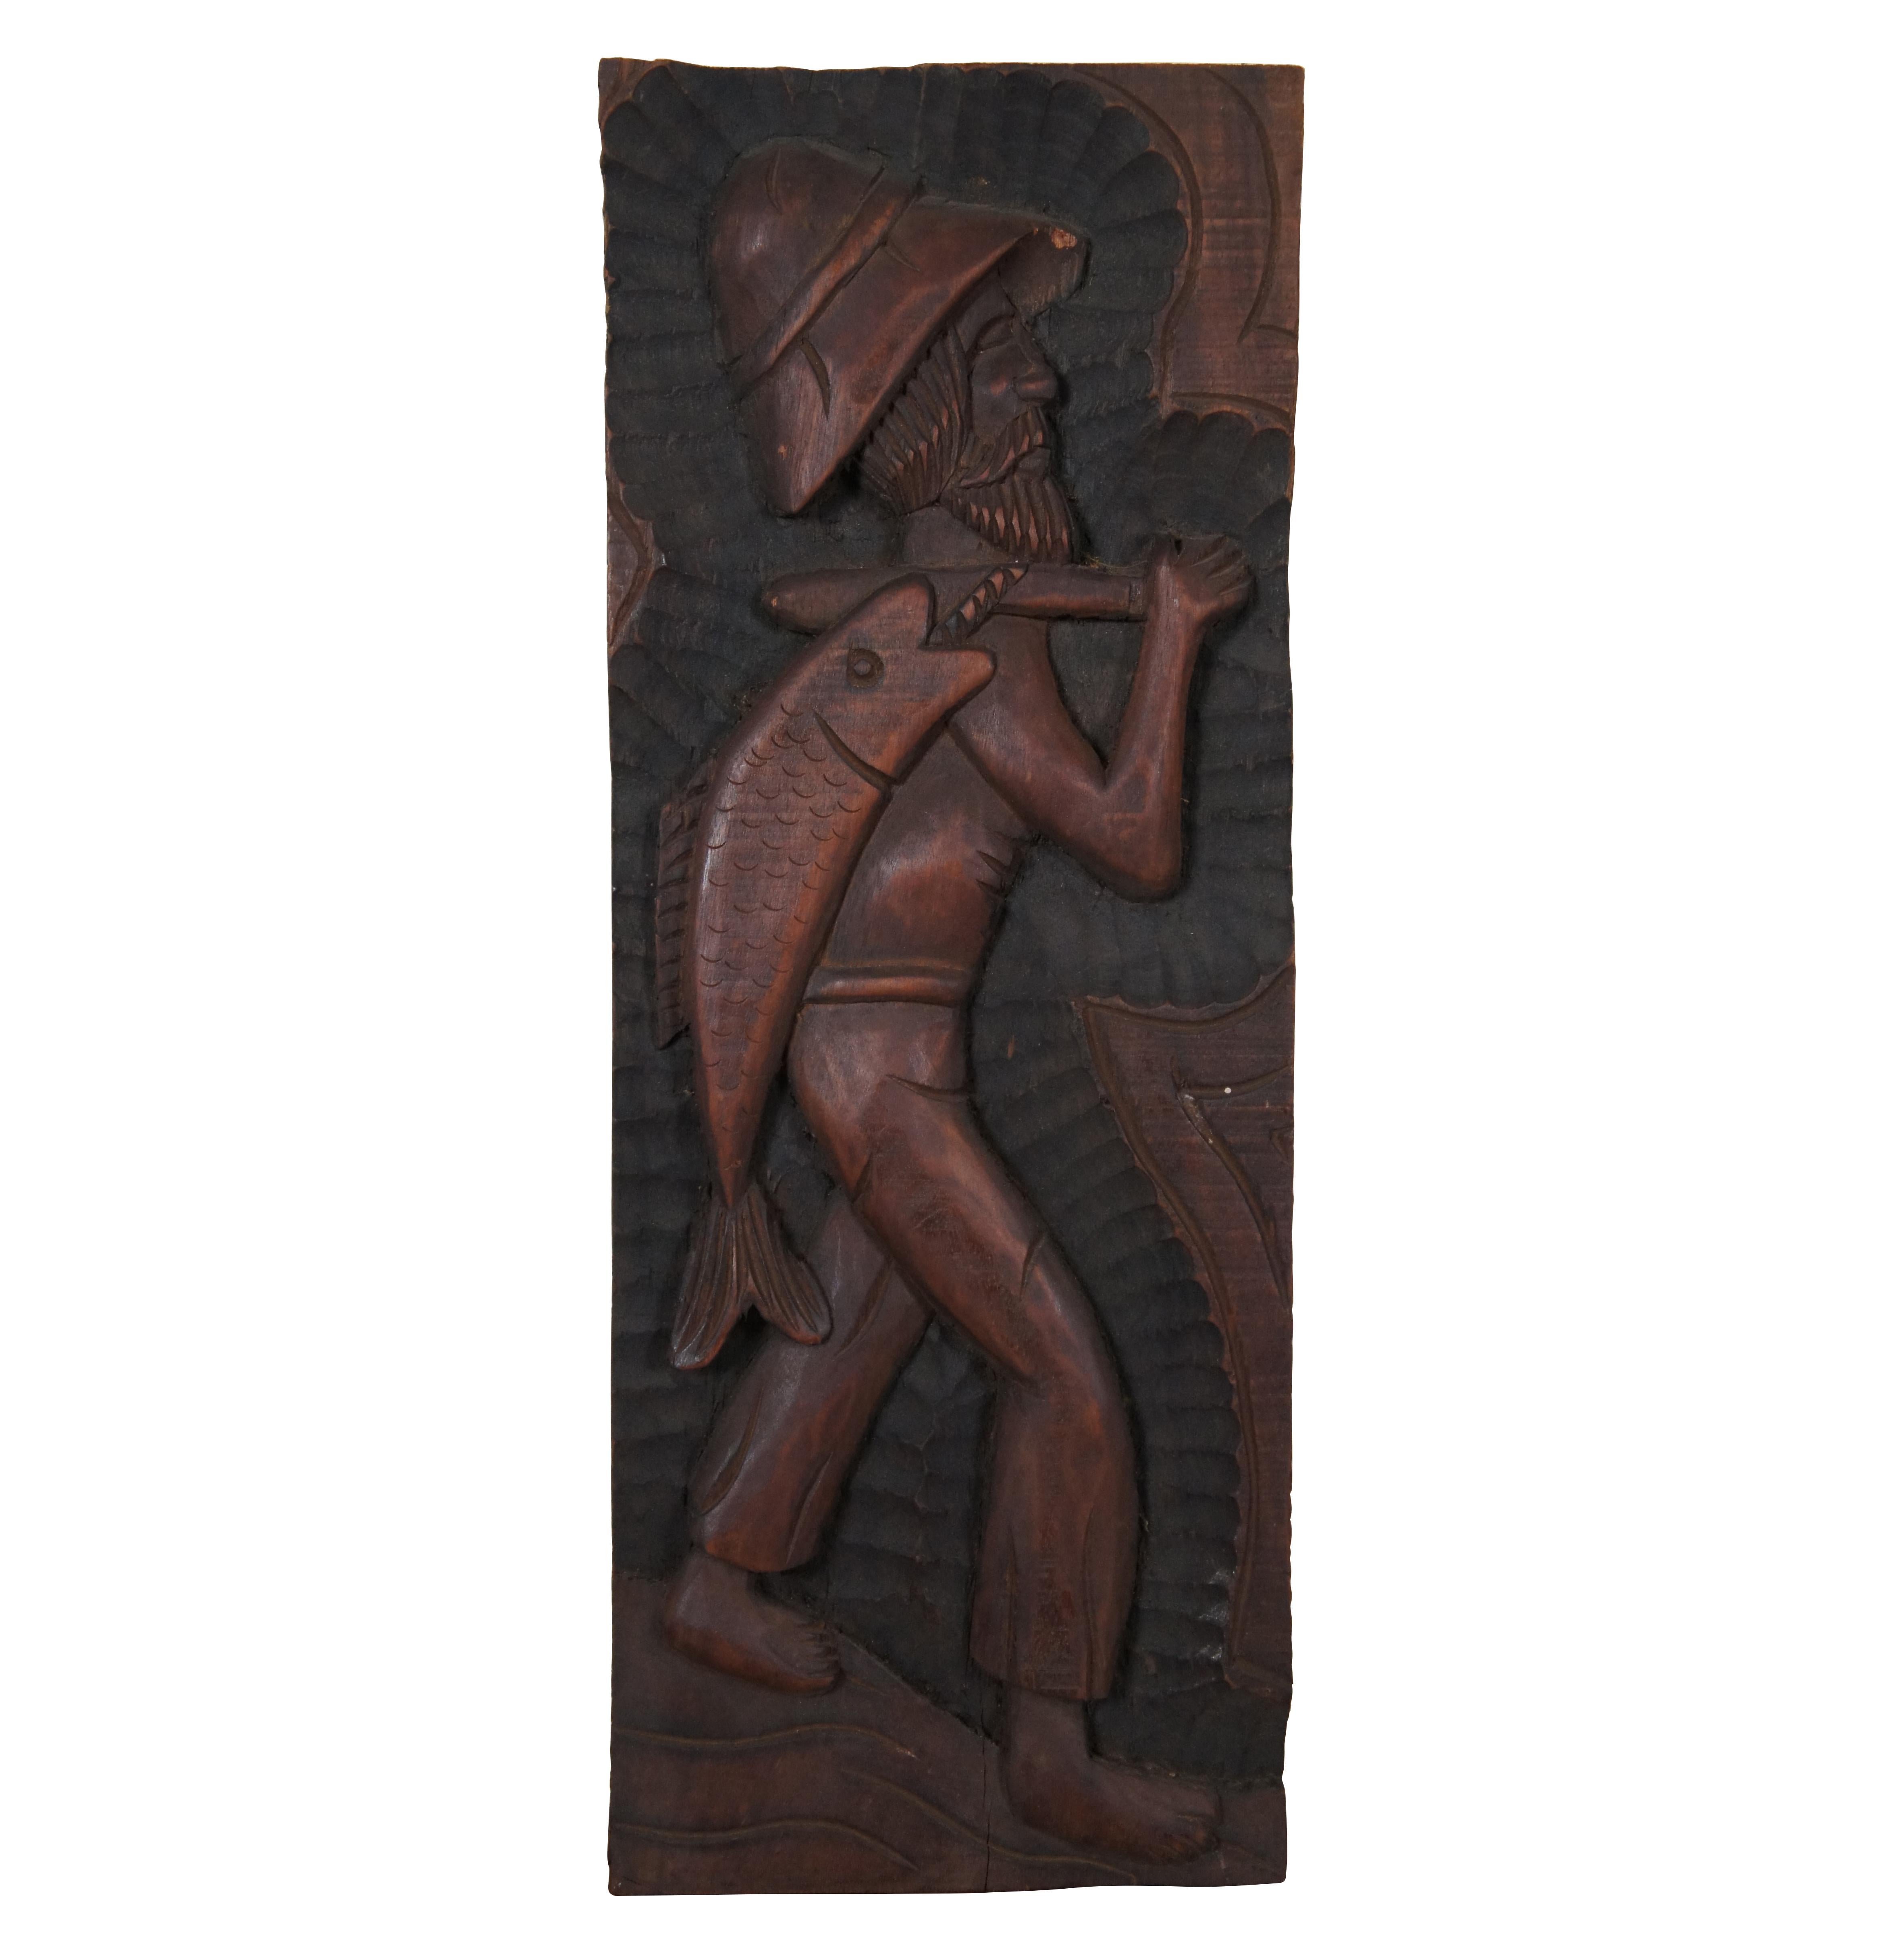 Set of three vintage folk art style carved wooden relief wall hangings, showing a fisher man with a large fish, a sailboat or raft, and a farmer with baskets of vegetables. Signed on verso – two signed Xikdlu and one signed Dalva.